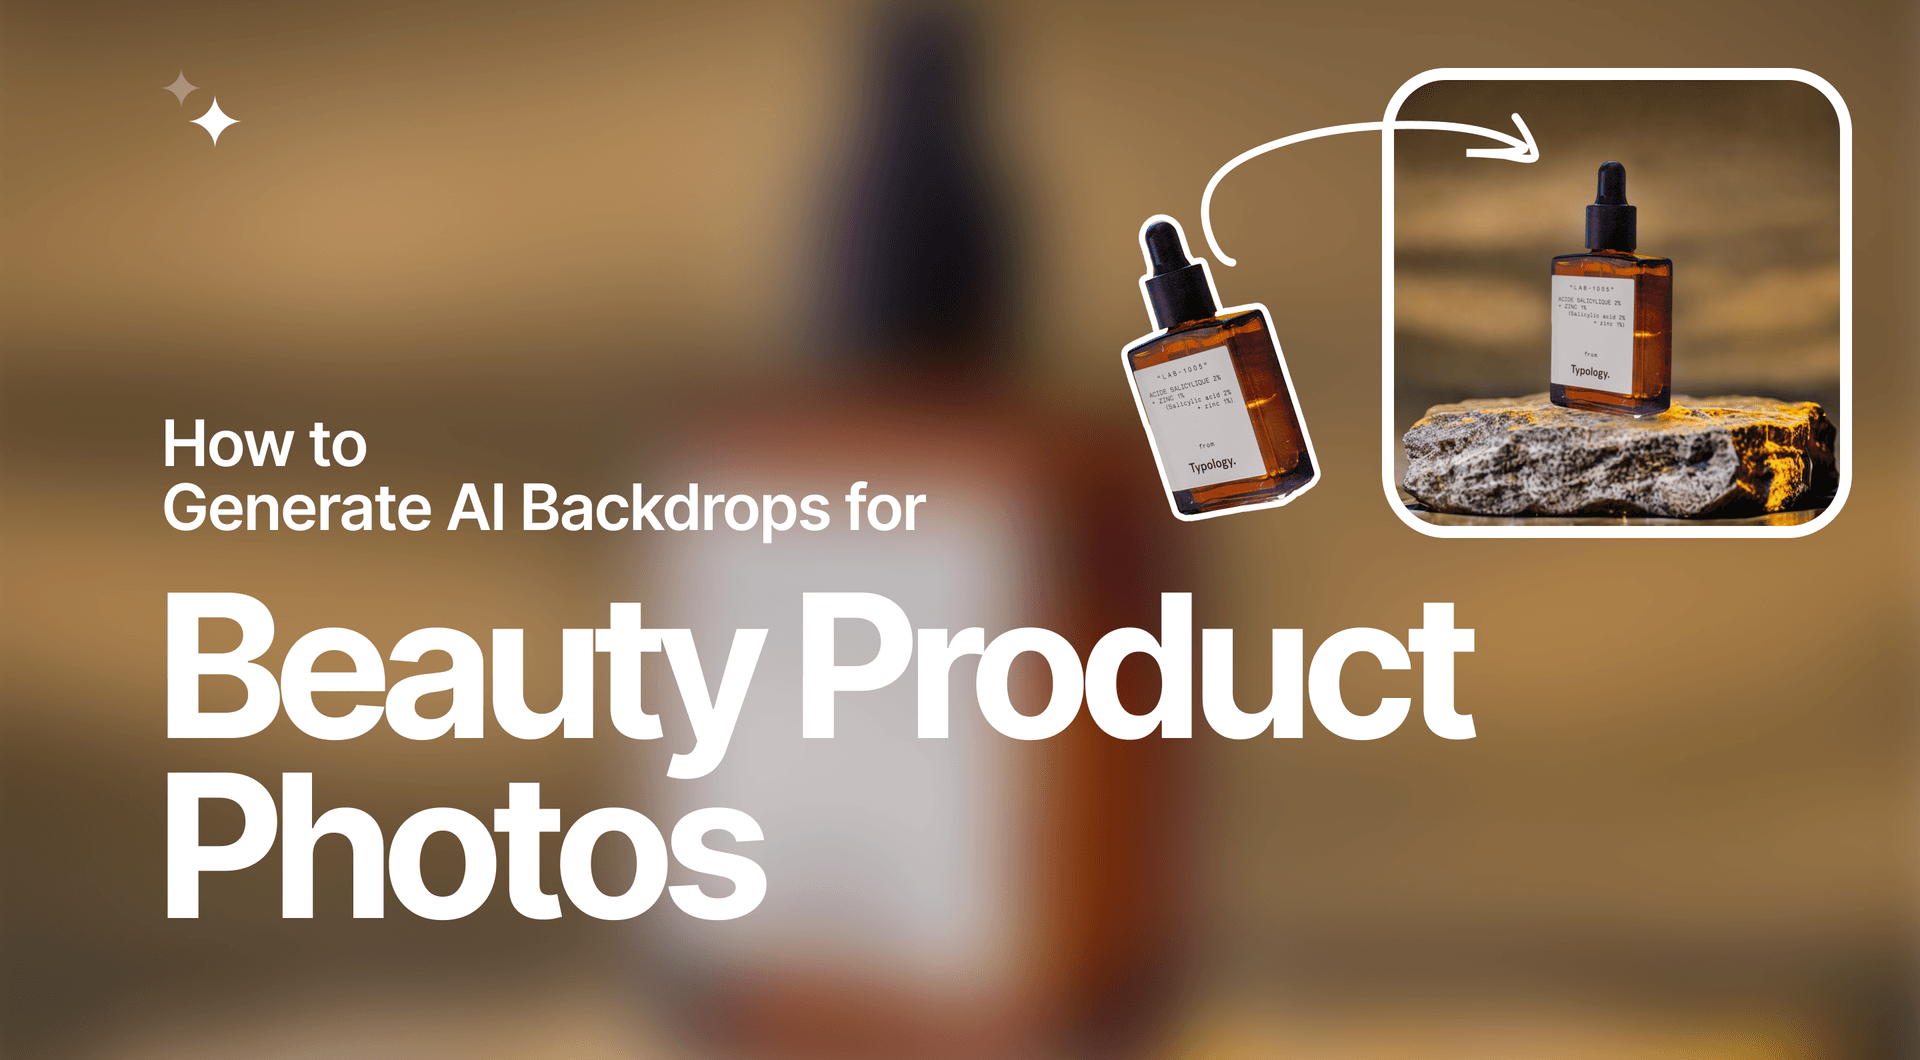 Picture for Create Elegant Backgrounds for Health and Beauty Product Photos article